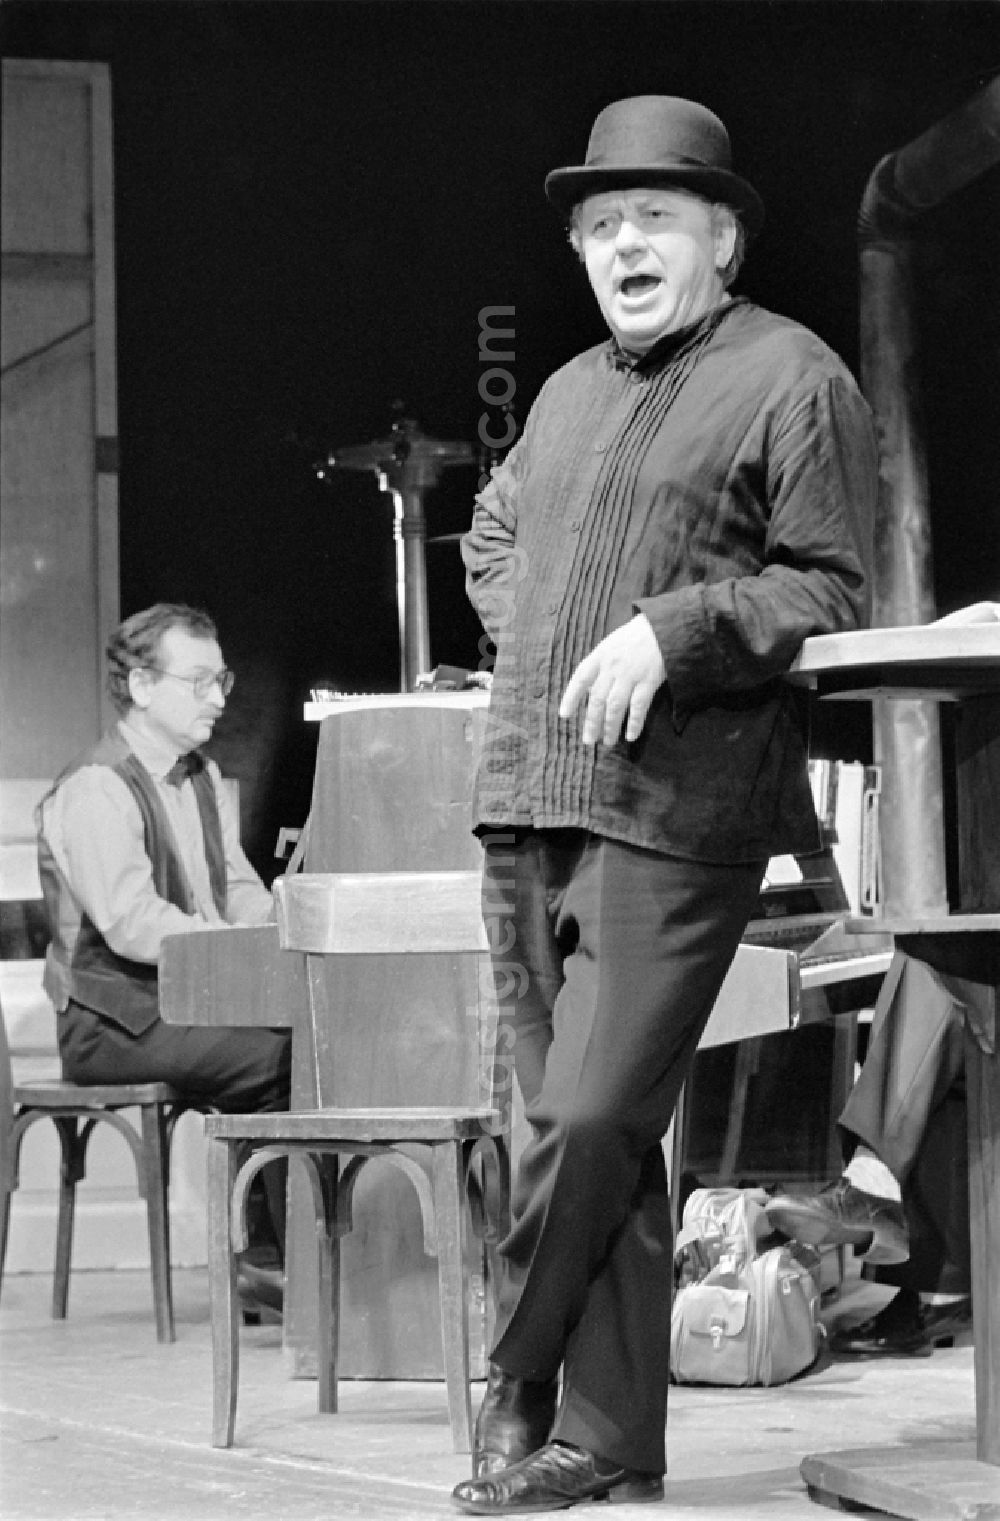 Berlin: German Theatre Berlin - Berlin Songs From Then And Yesterday. Actors / actresses and performers in a theatre - scene and stage set in the Mitte district of Berlin, the former capital of the GDR, German Democratic Republic. On stage - Kurt Boewe in front, behind him Uwe Hilprecht at the piano